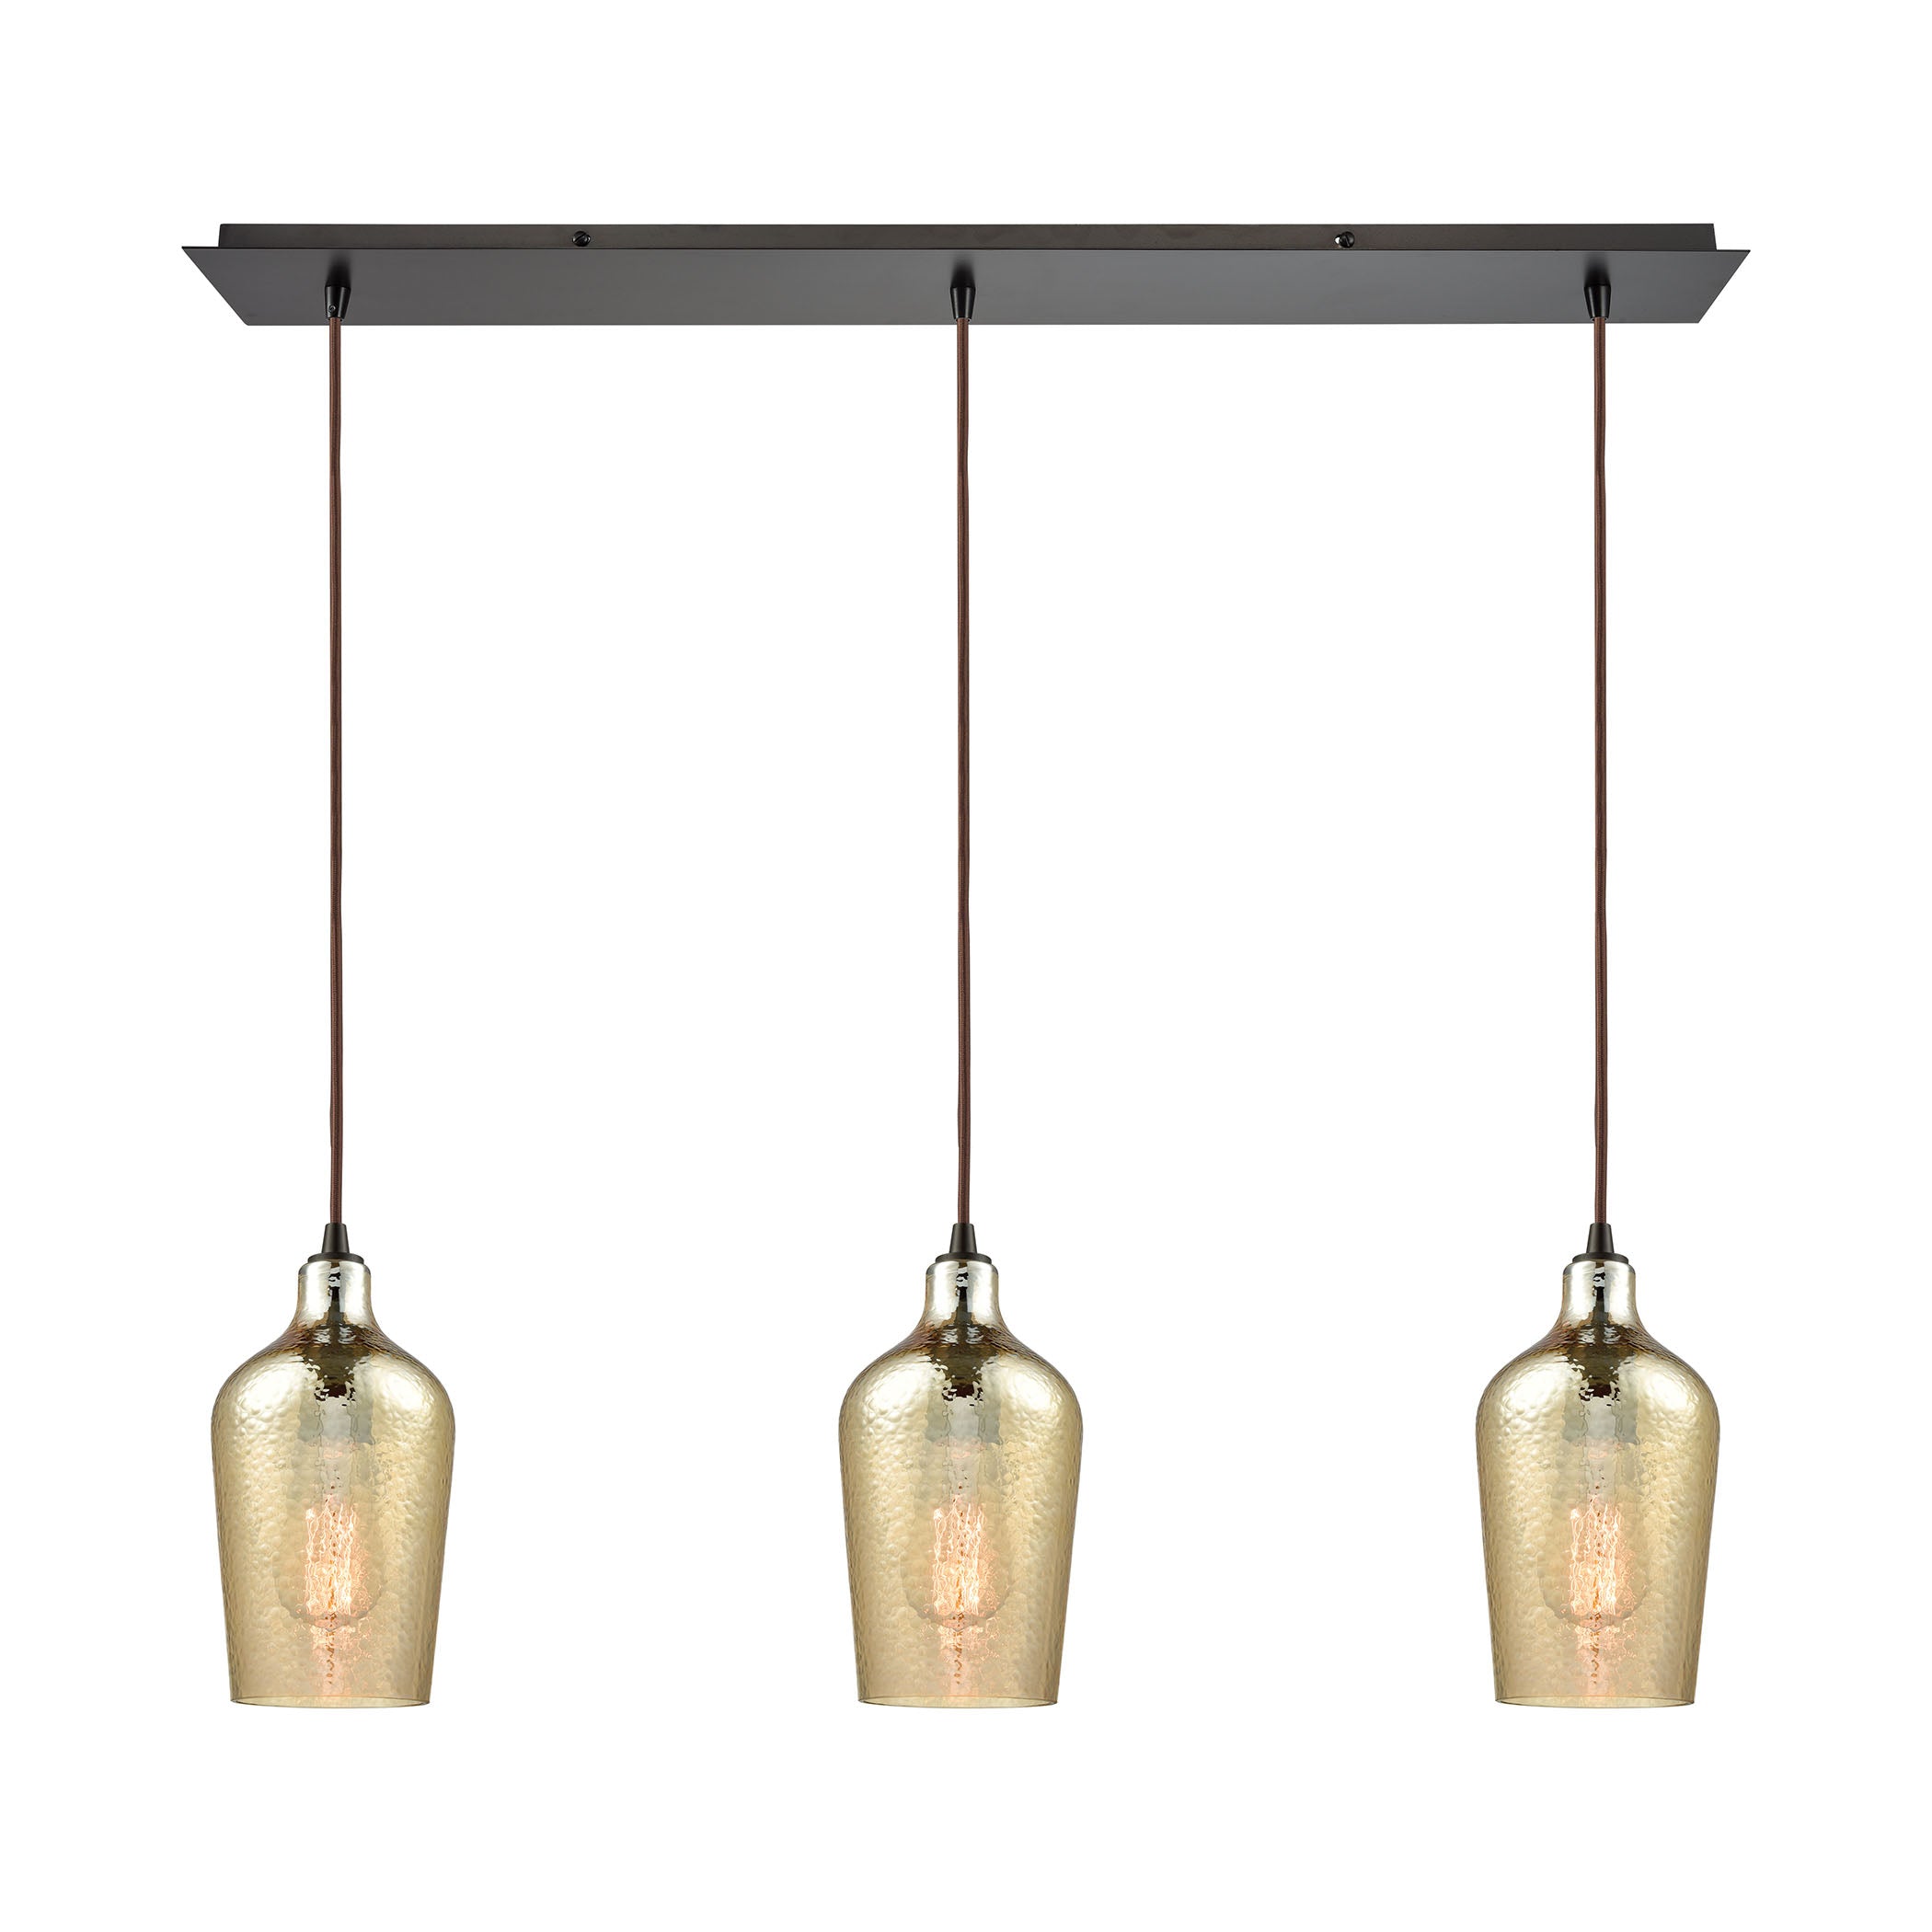 ELK Lighting 10840/3LP Hammered Glass 3-Light Linear Mini Pendant Fixture in Oiled Bronze with Amber-plated Hammered Glass